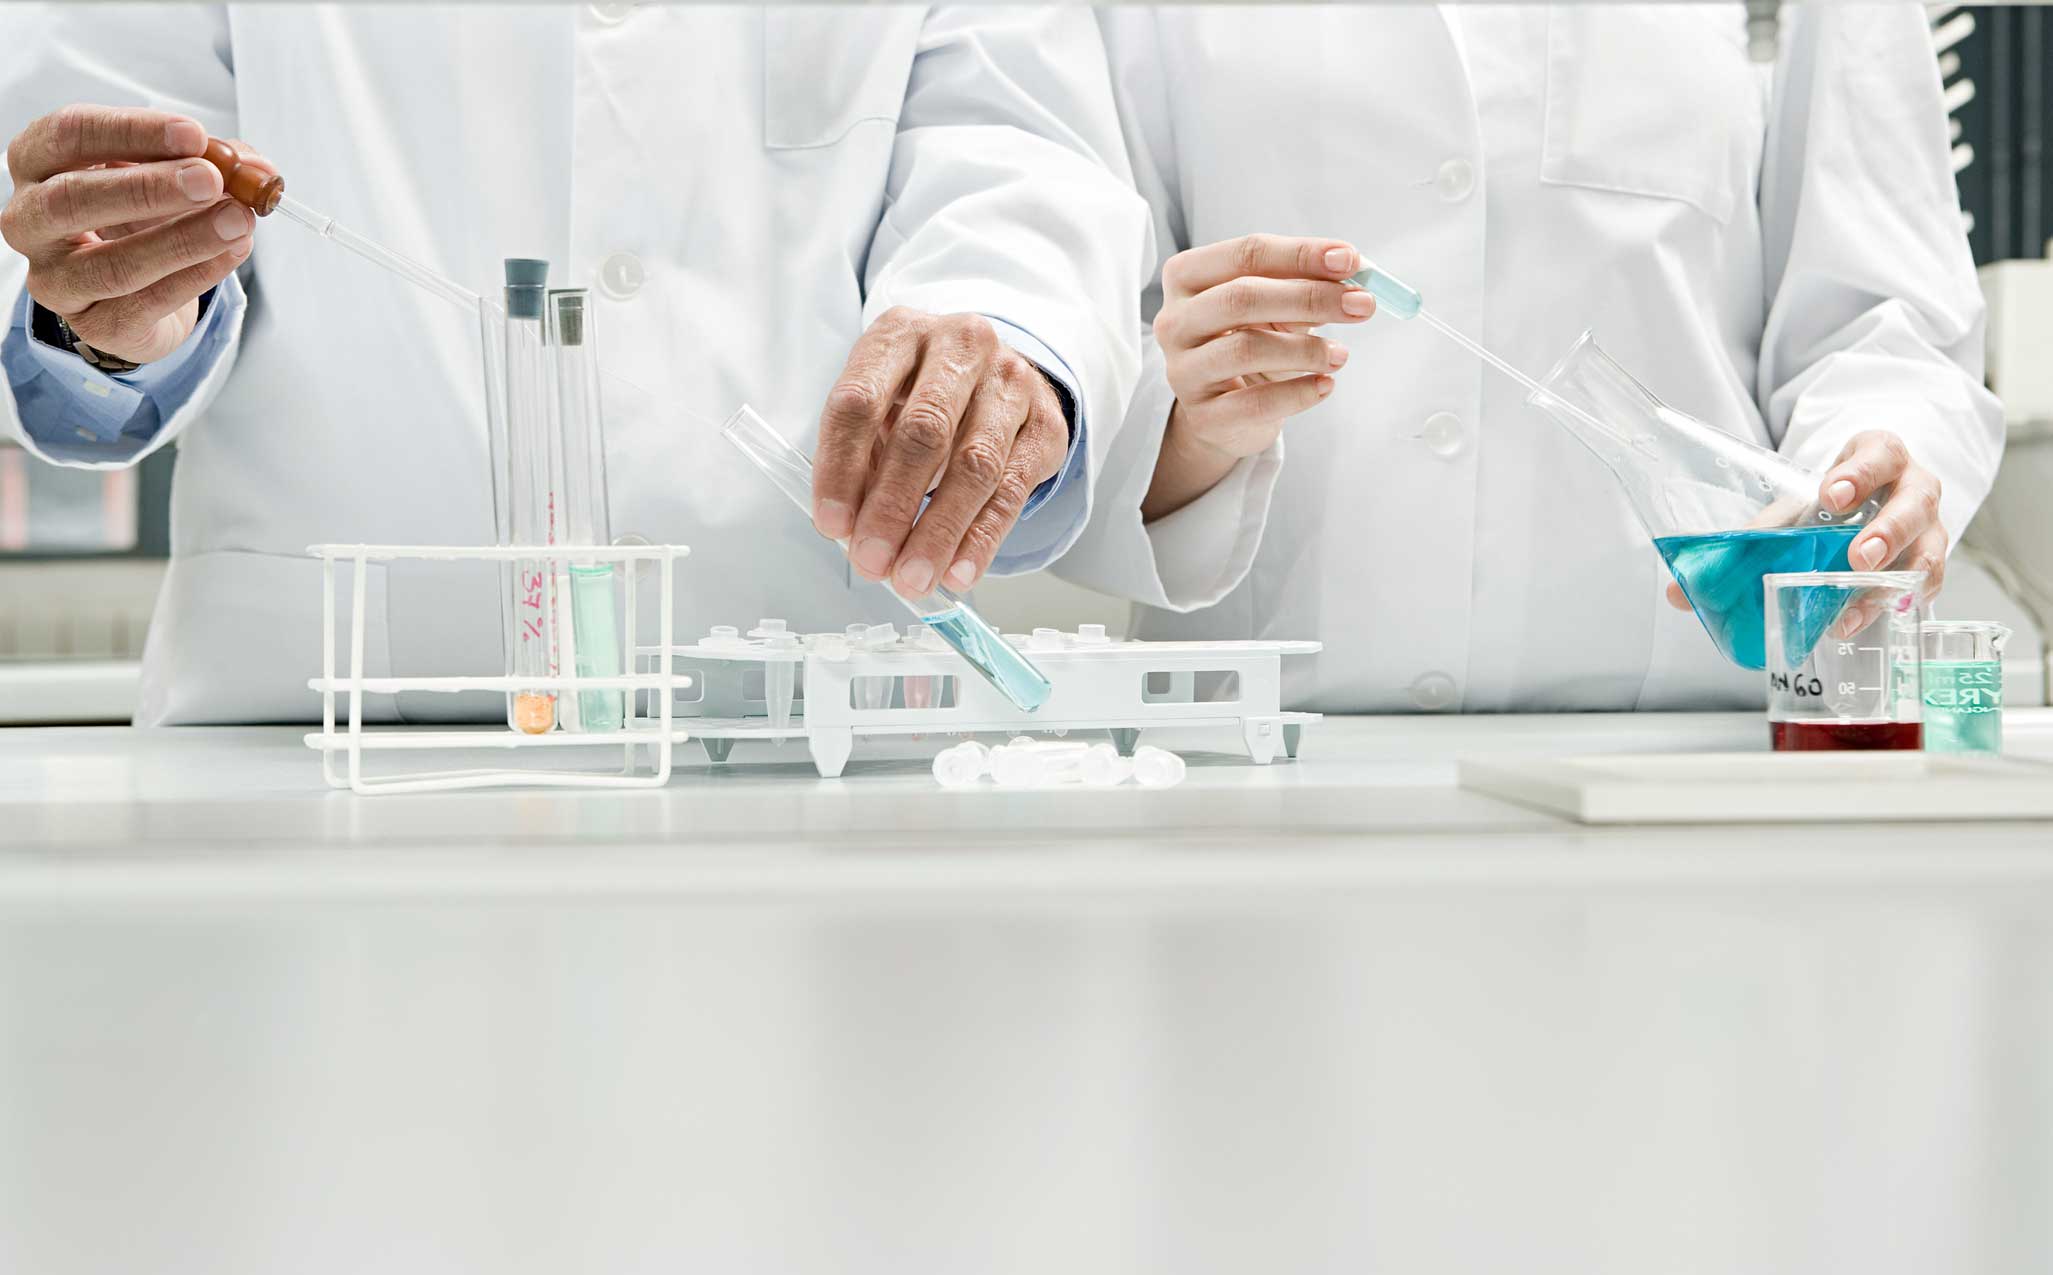 Chemists in white lab coats using lab equipment